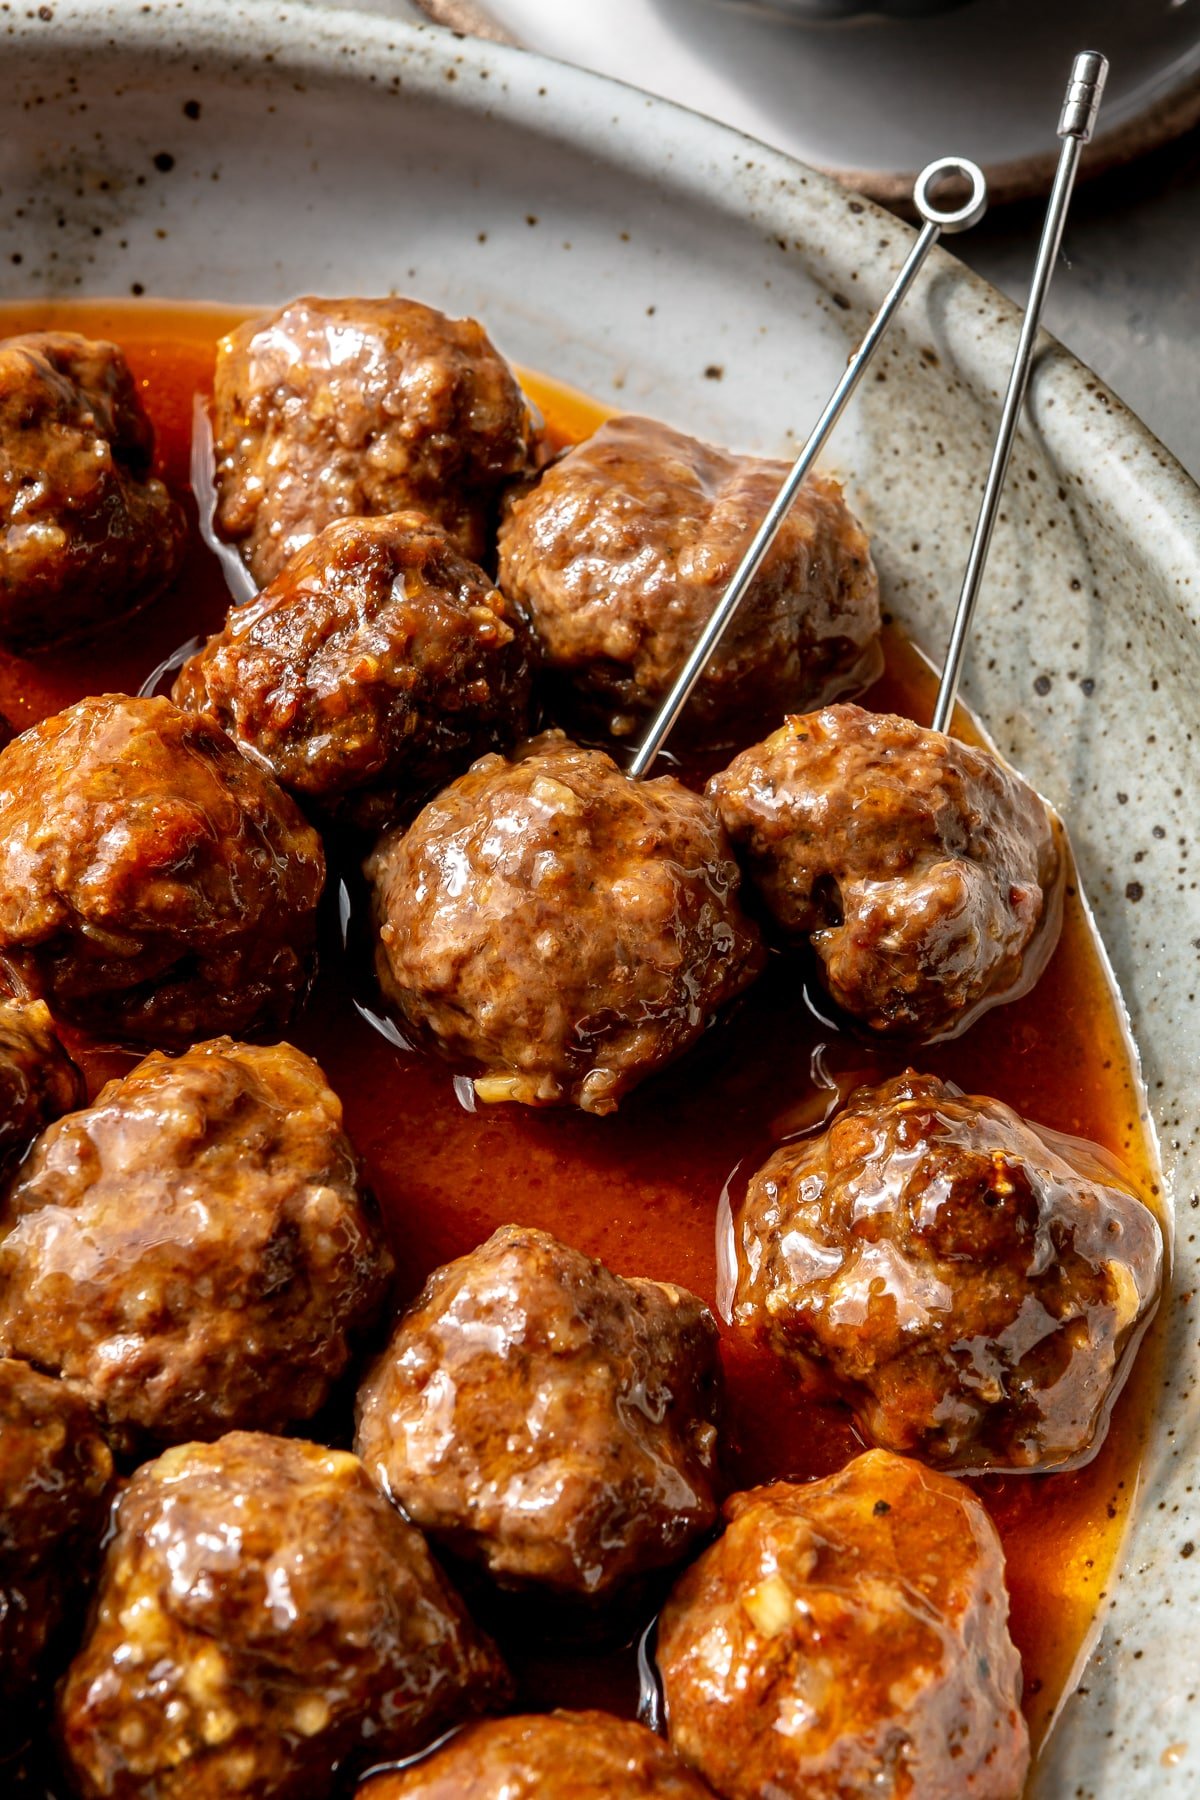 Sweet and sour meatballs have been placed in a serving bowl. Serving skewers have been placed in a couple.